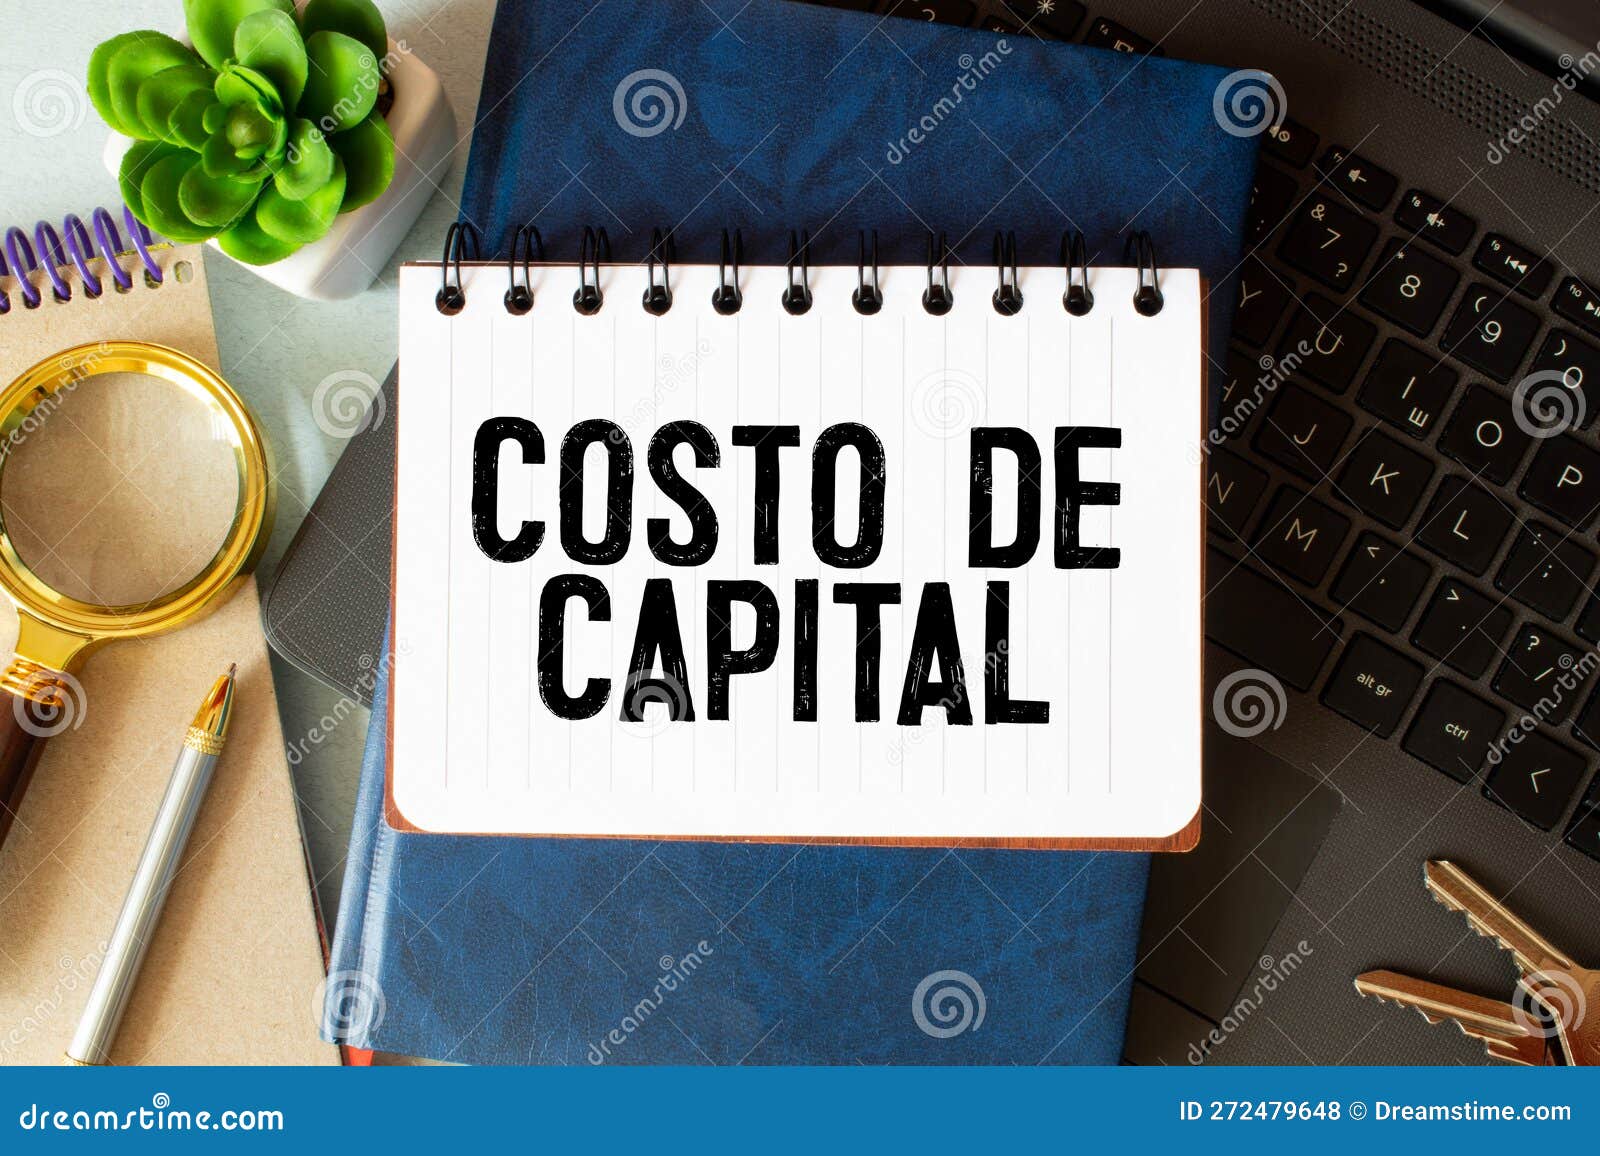 text costo de capital written on notebook with chart,calculator and dollars